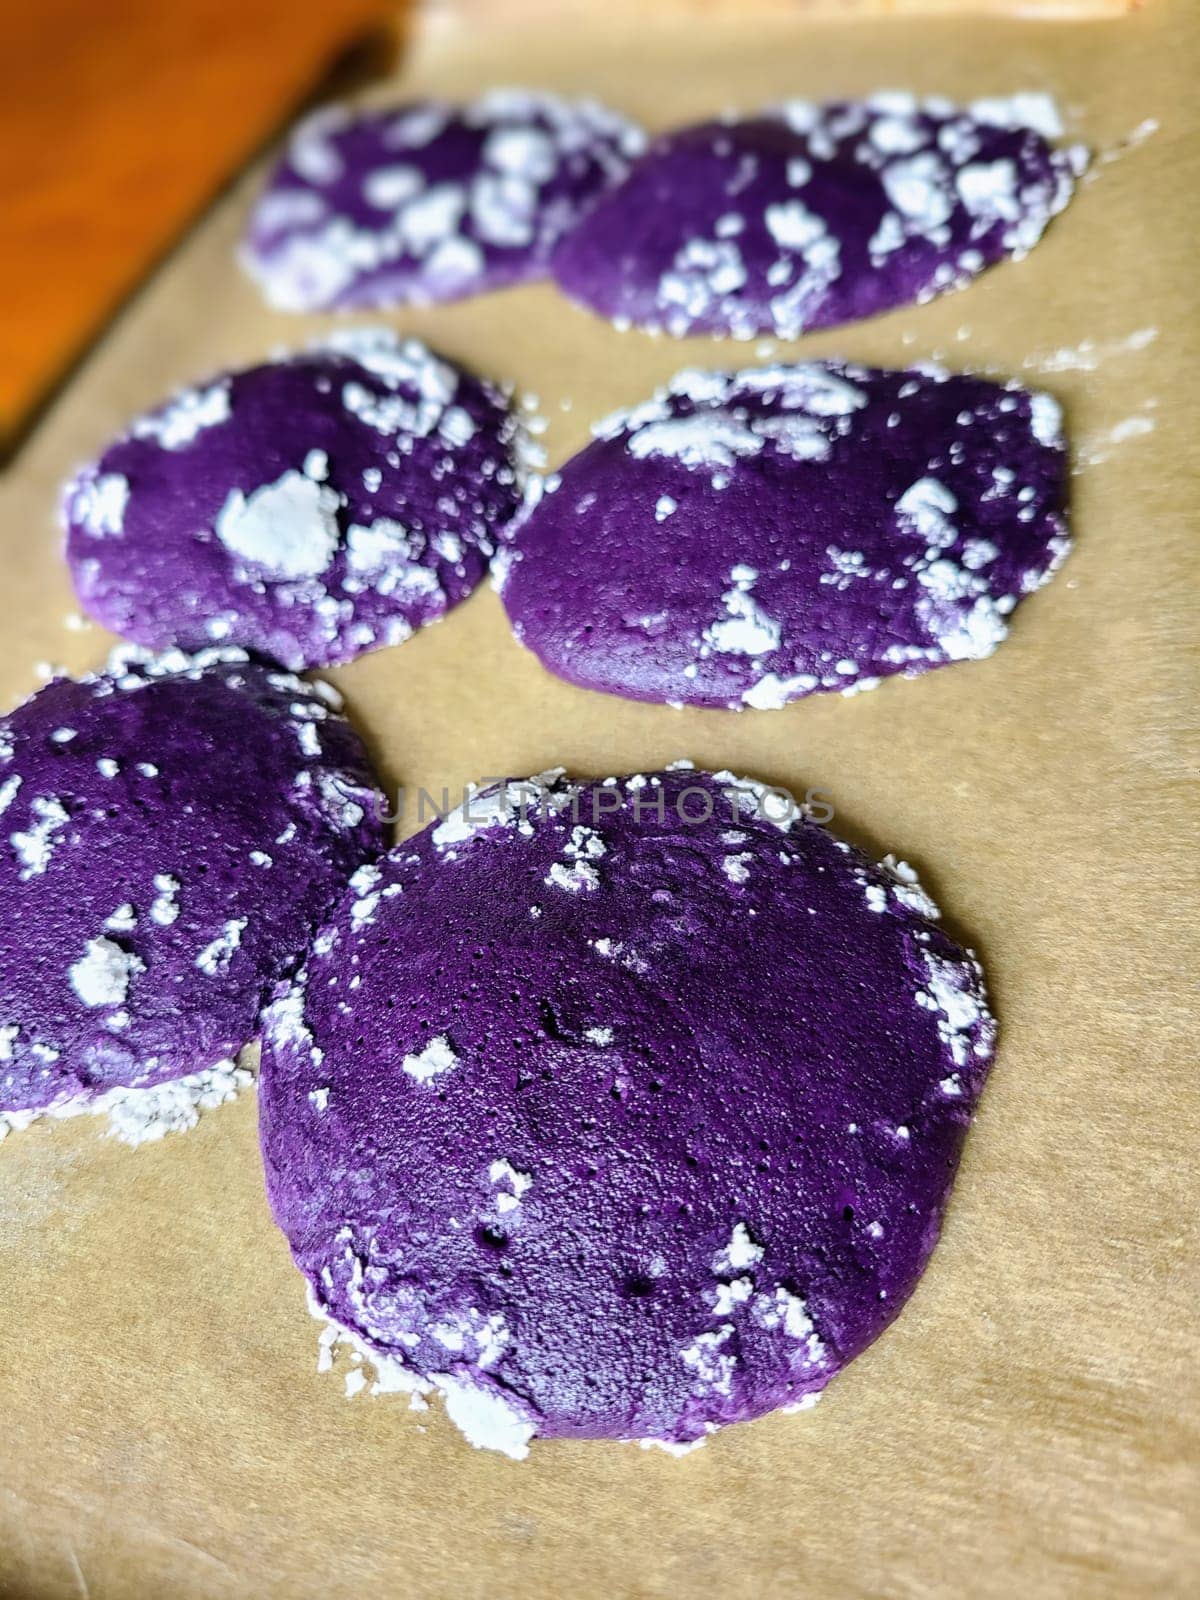 Unique homemade ube purple cookies dusted with sugar in a cozy kitchen setting, Fort Wayne, Indiana, 2023